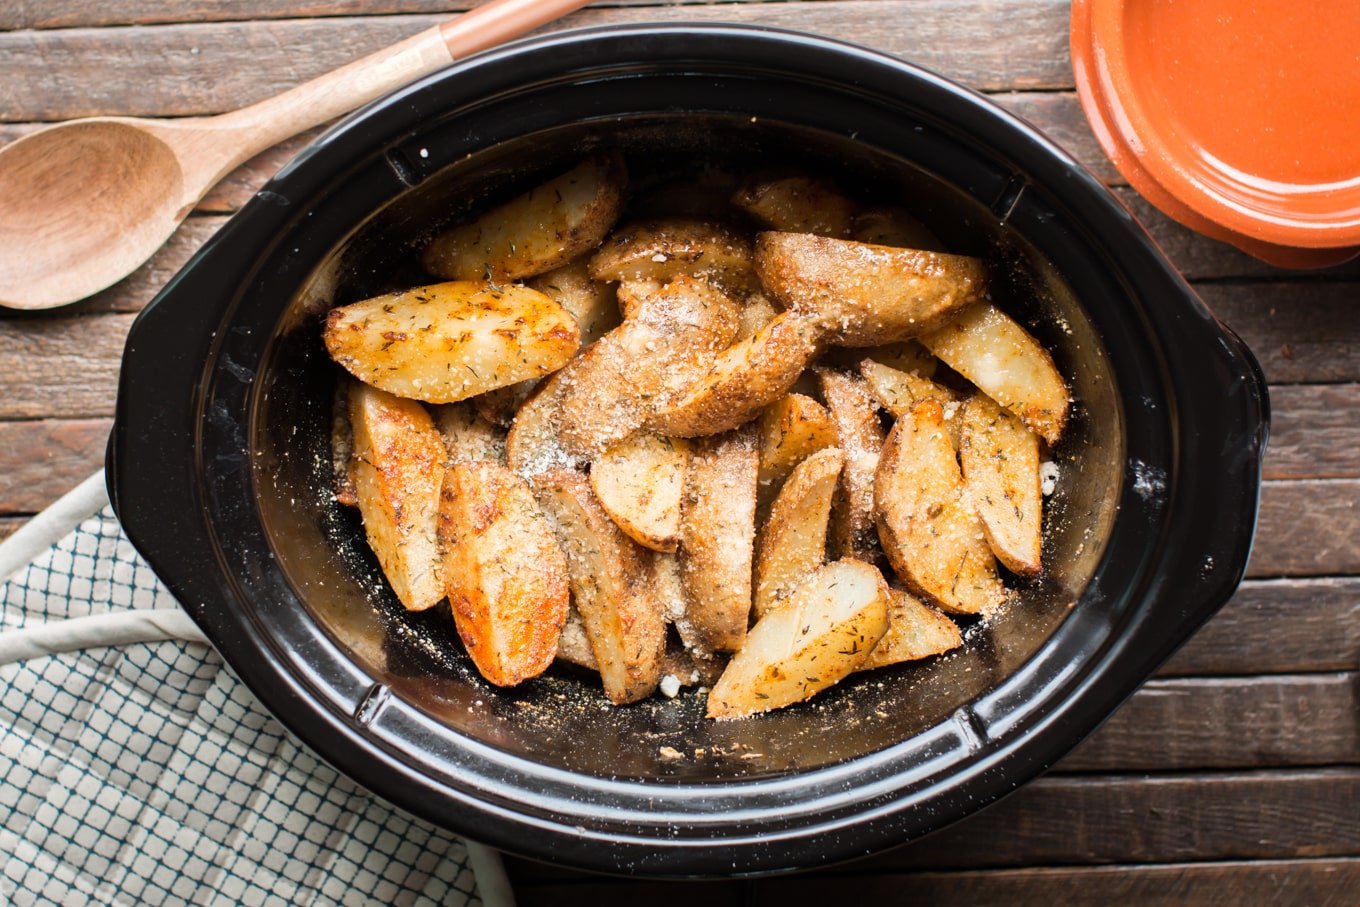 Potato wedges in slow cooker cooked with Parmesan cheese and Cajun spices.